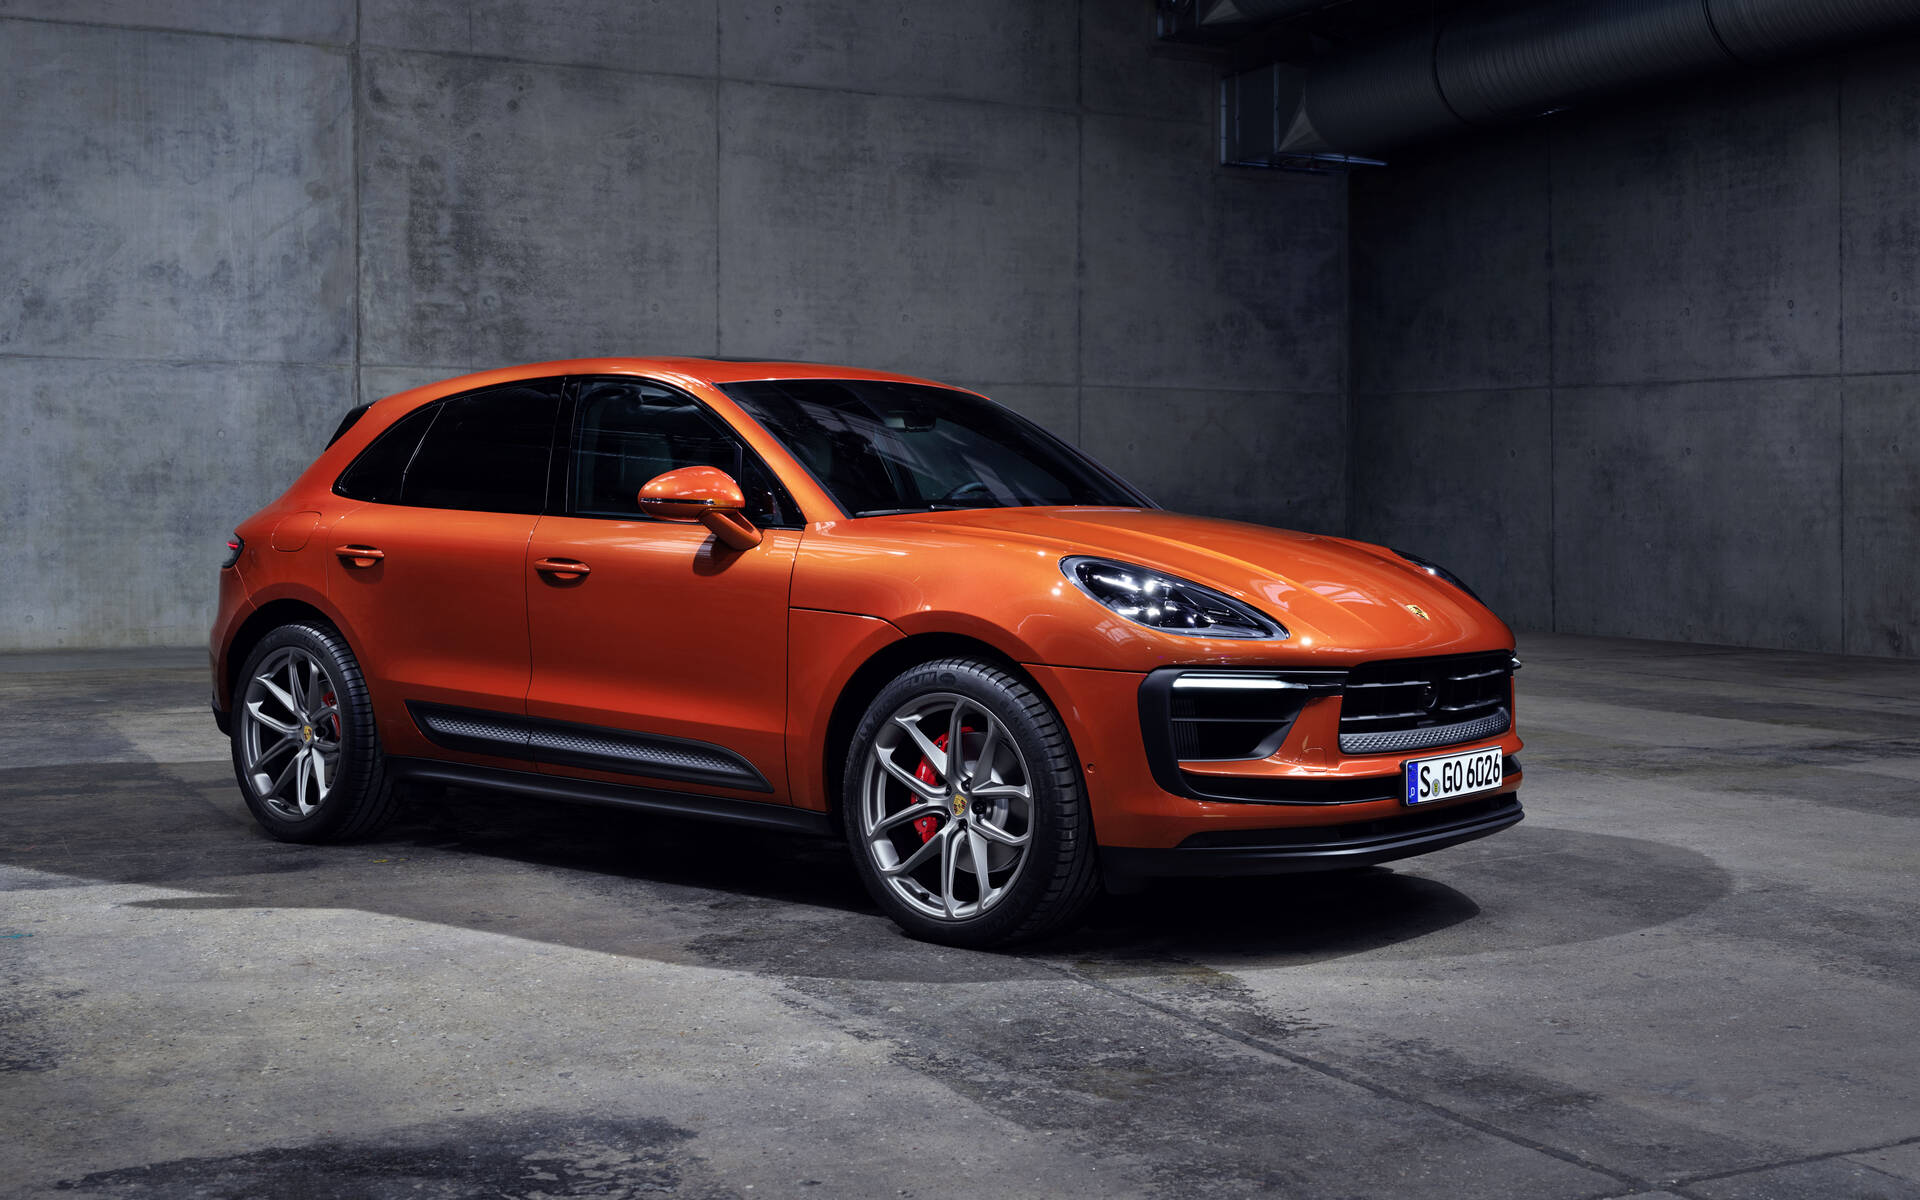 2022 Porsche Macan Goes Under the Knife, Flexes its Muscles - The